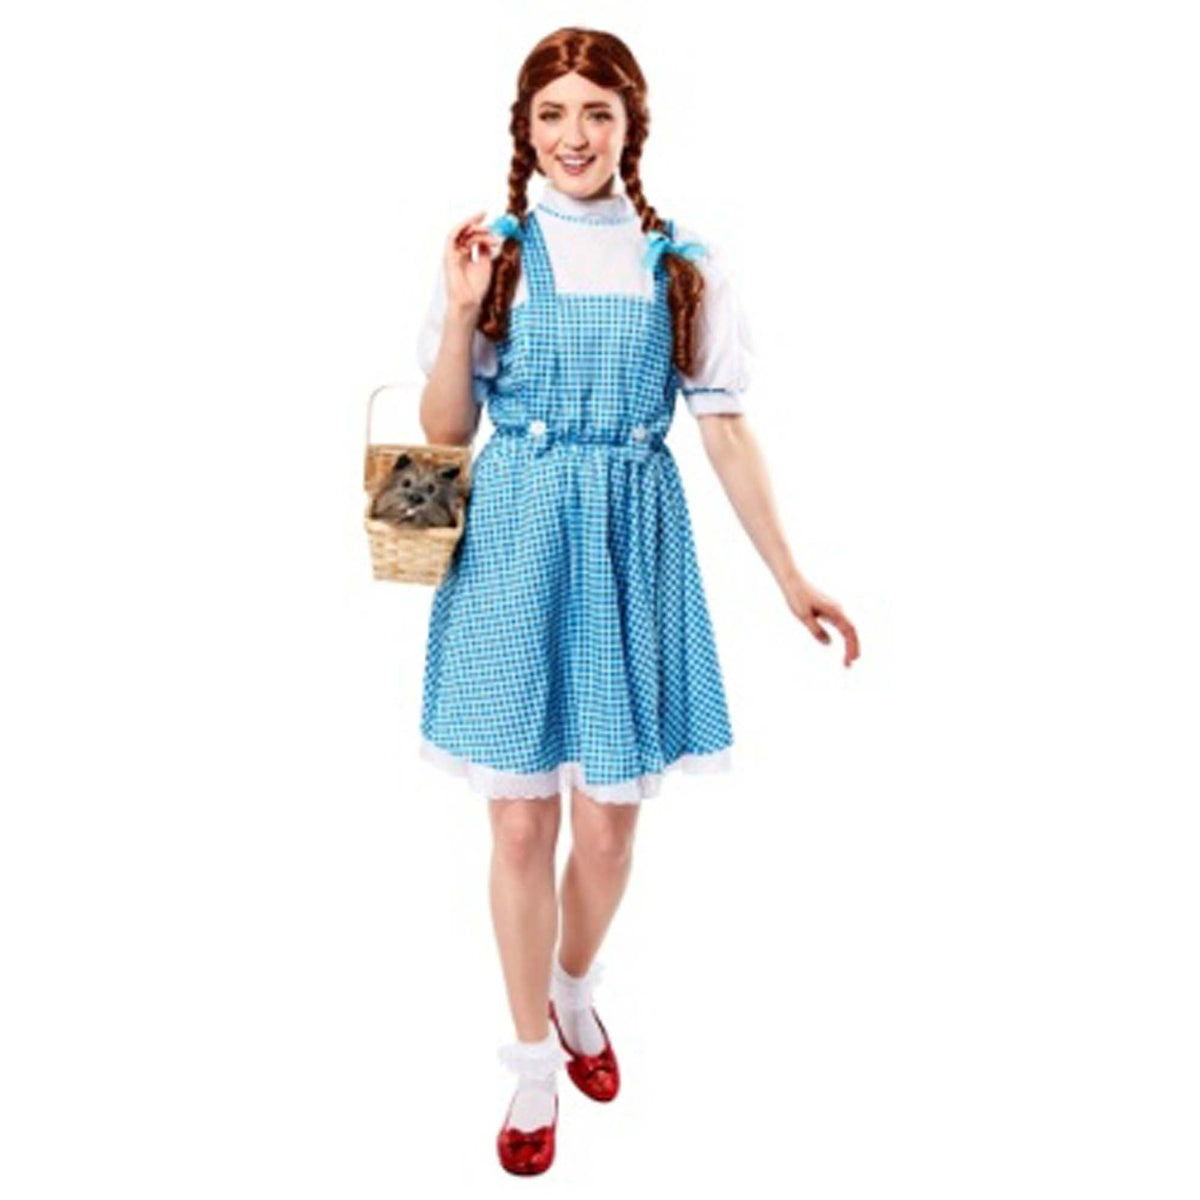 RUBIES II (Ruby Slipper Sales) Costumes The Wizard of Oz Dorothy Costume for Adults, Blue and White Dress